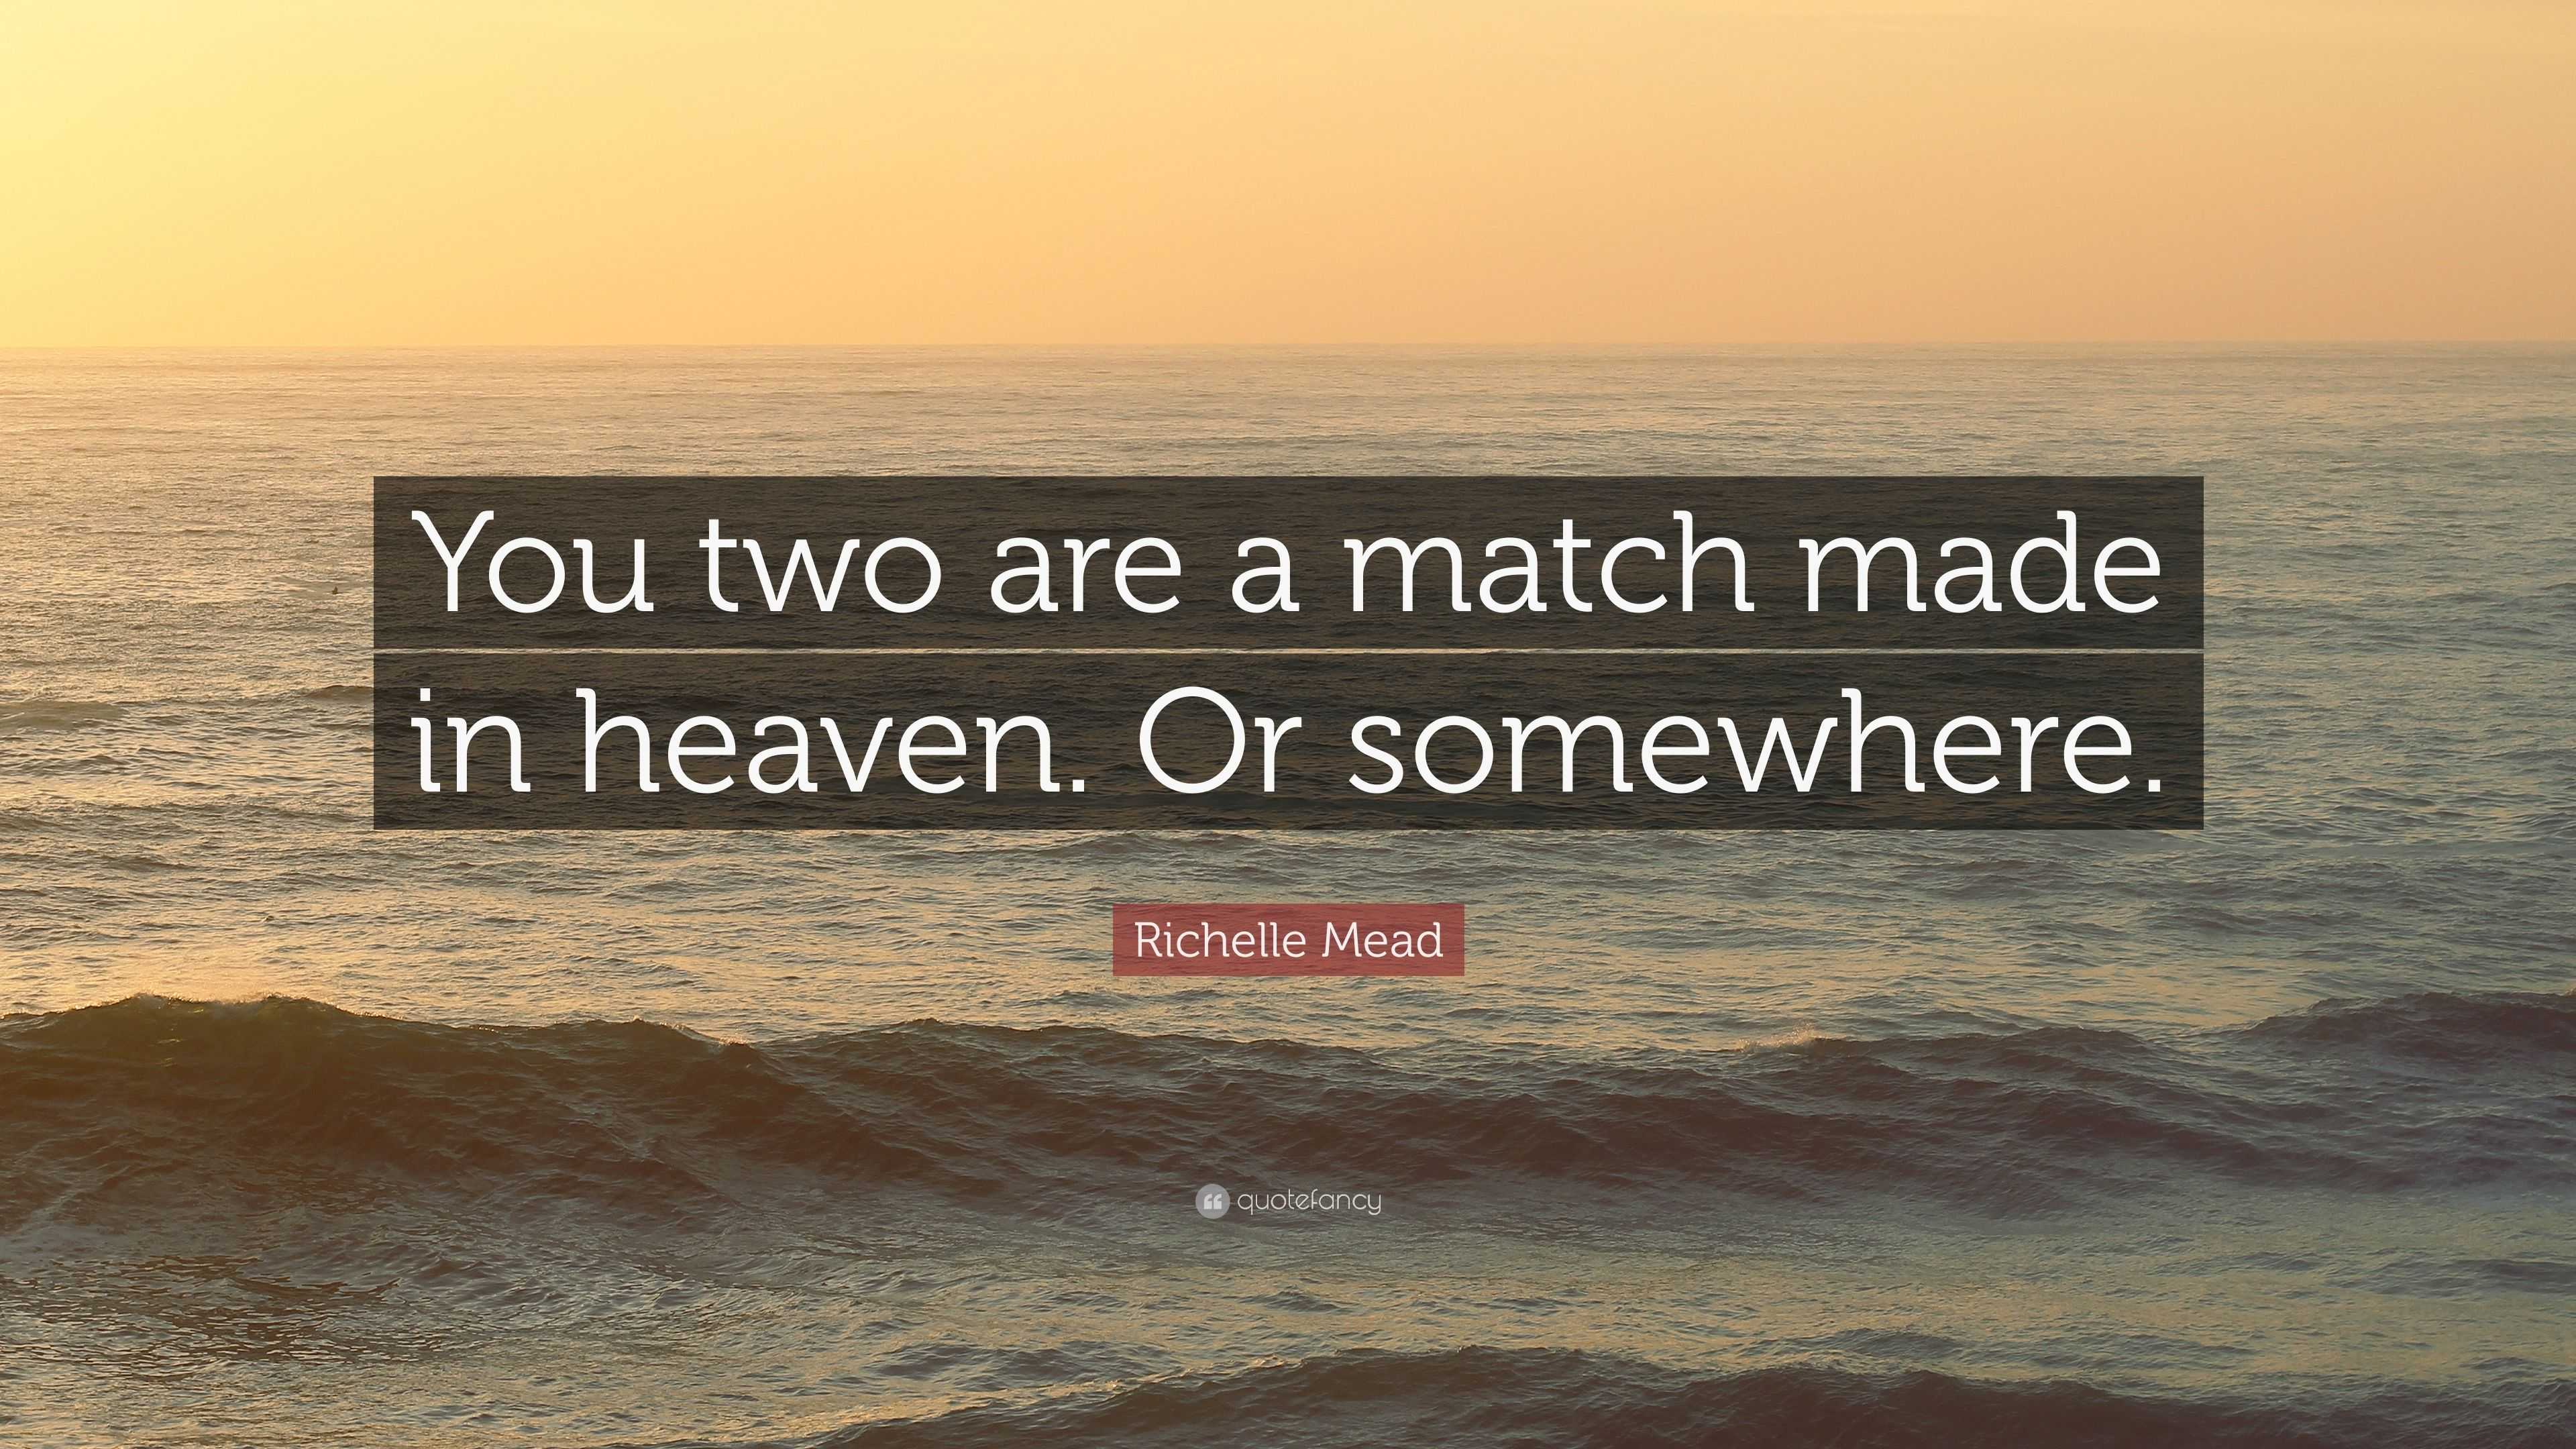 Richelle Mead Quote: “You two are a match made in heaven. Or somewhere.”